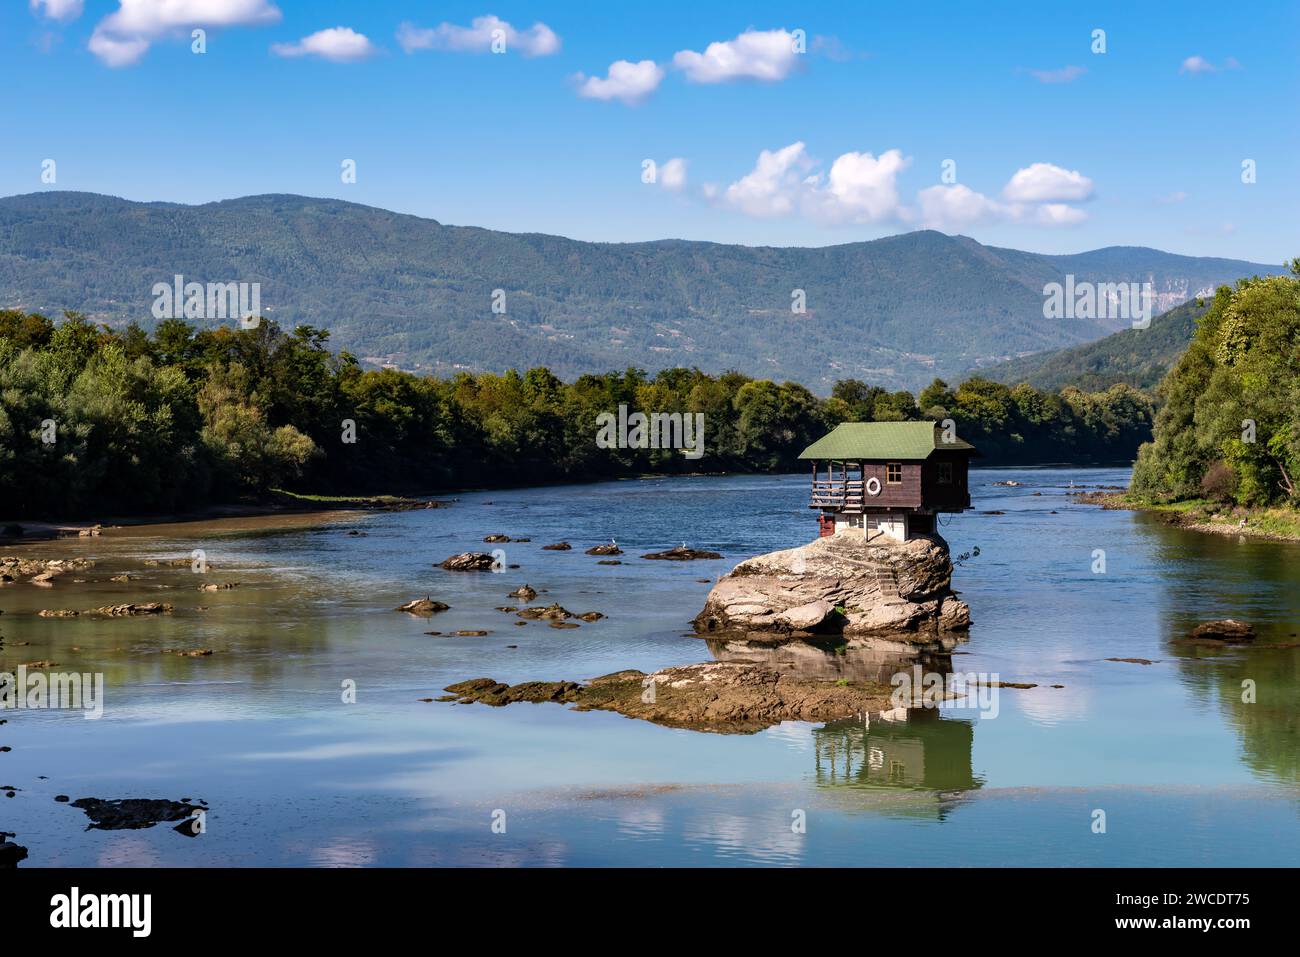 Famous small wooden house on a rock in the middle of river Drina in Bajina Basta, Serbia. Stock Photo